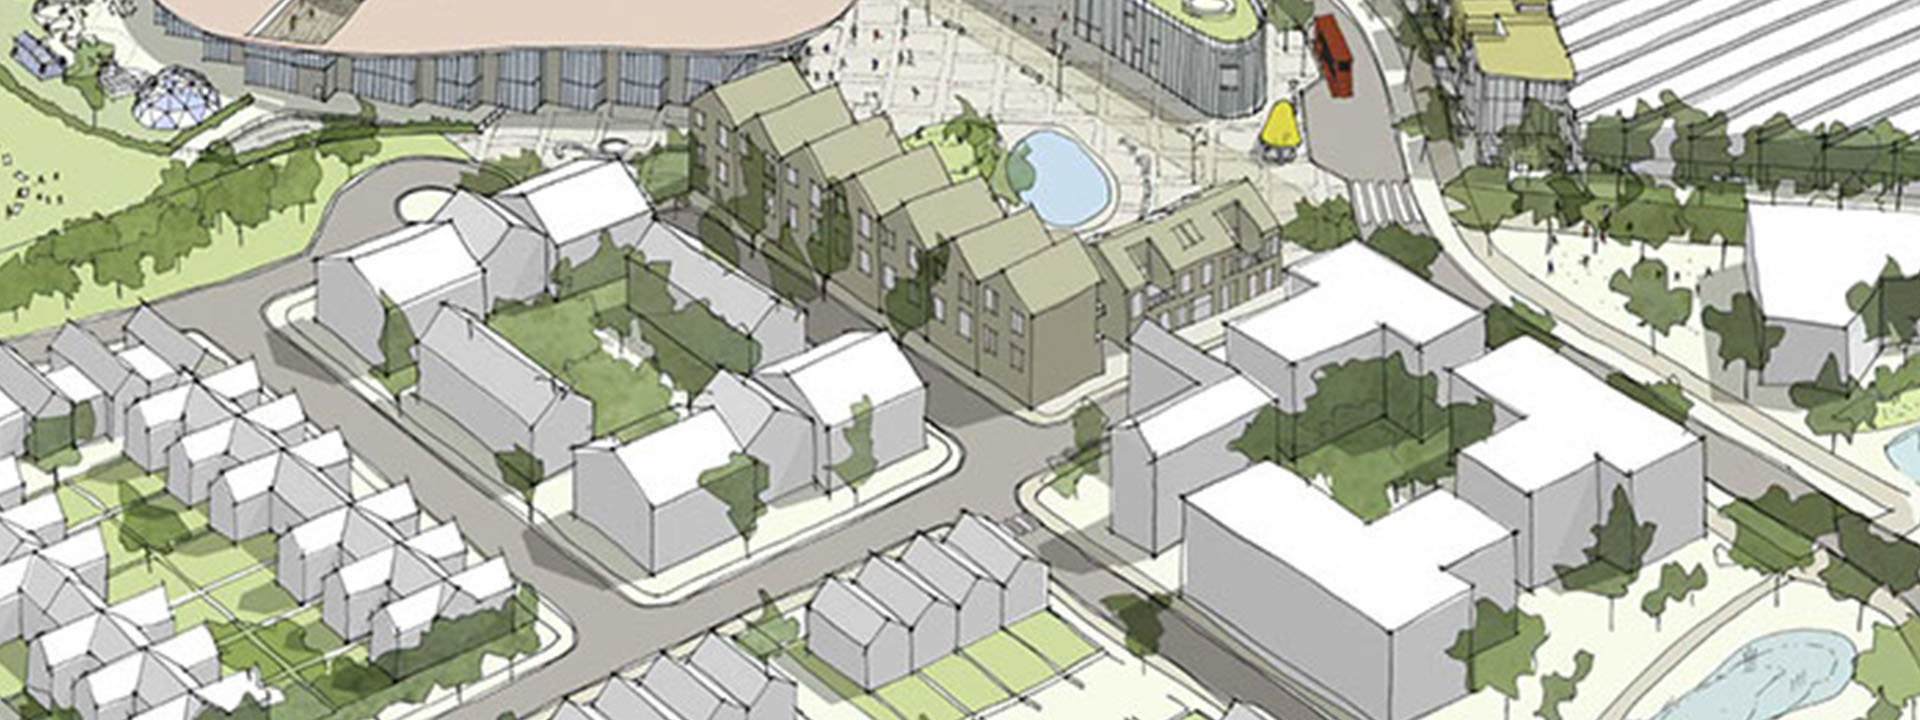 Modern and Modular Street Furniture set for New Housing and Community Development in St Neots